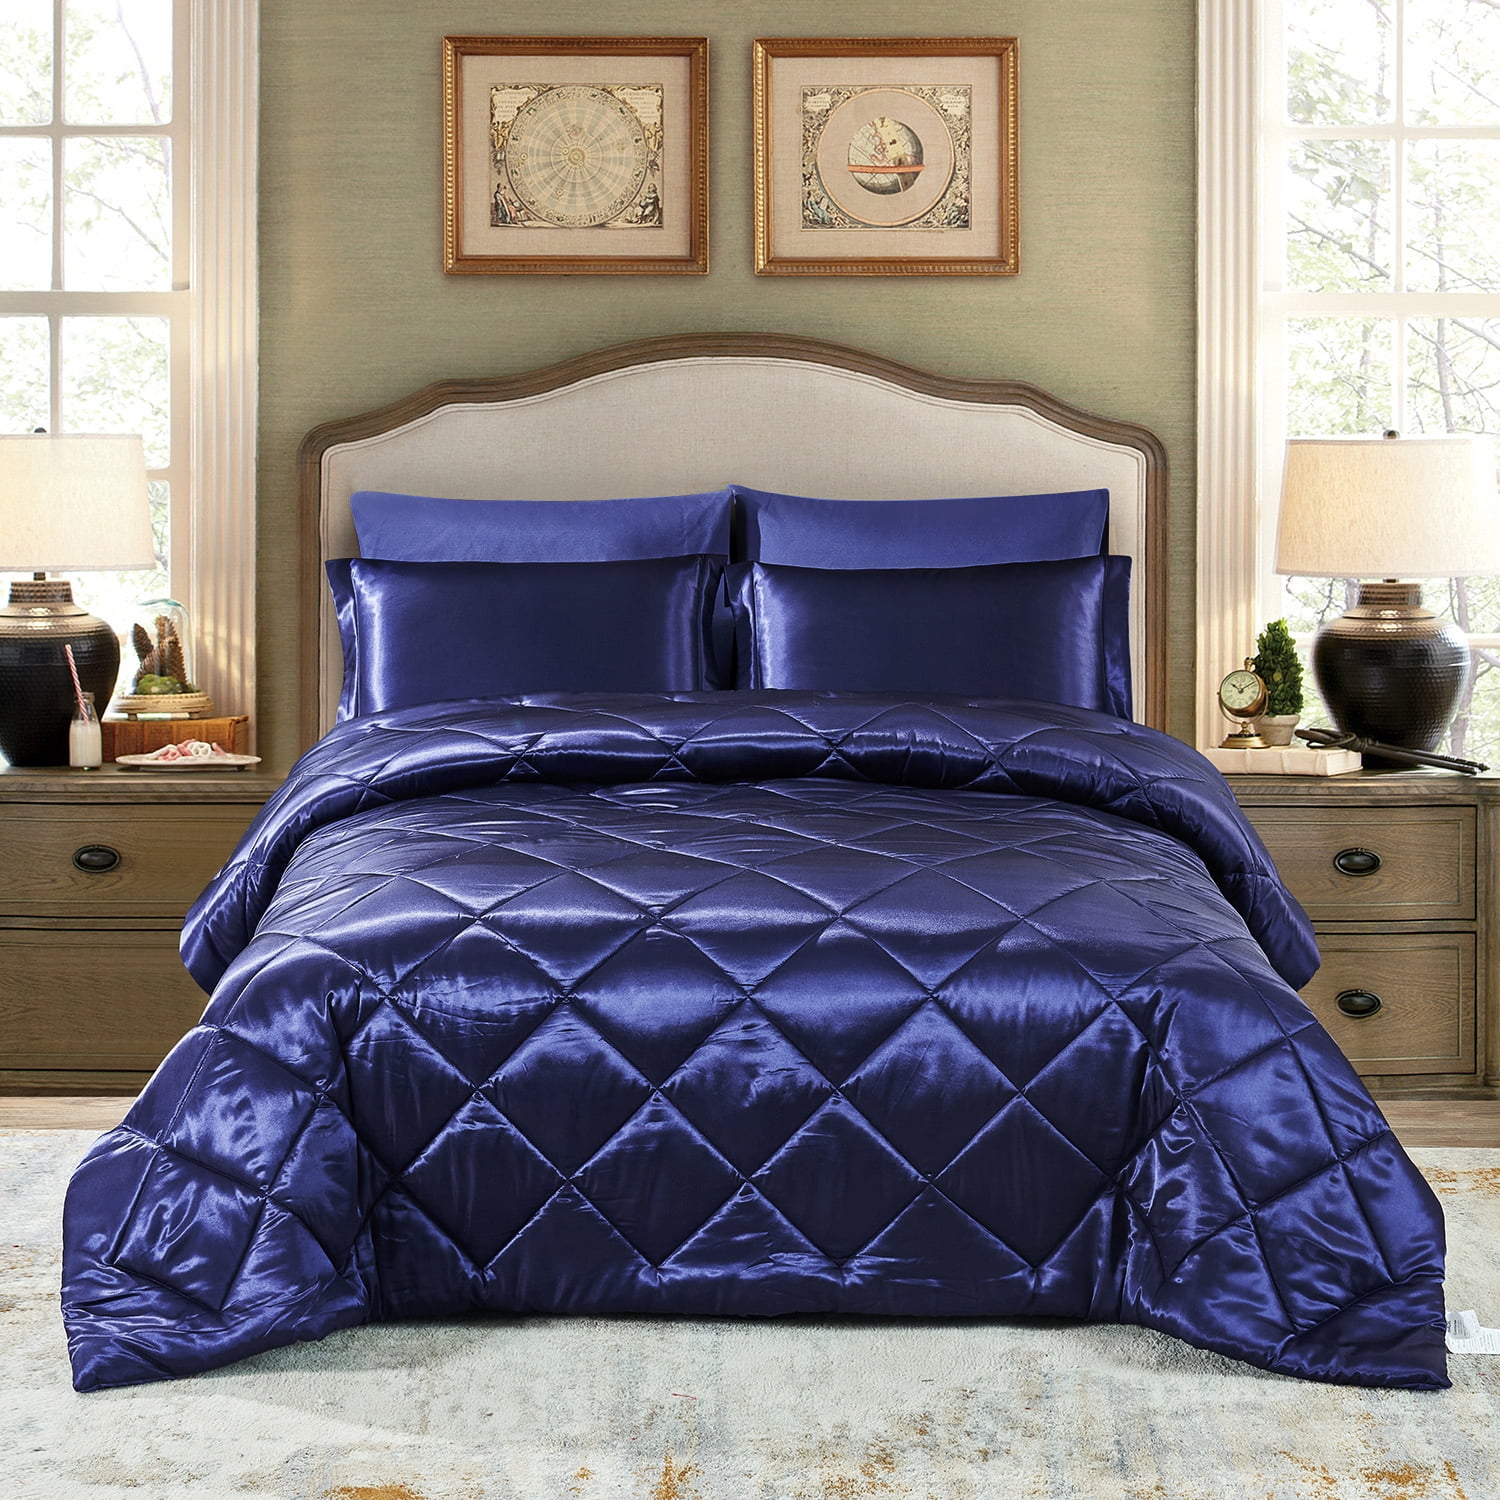 Details about   Wellbeing Bed Sheet and Comforter Set Ea Hypoallergenic Ultra Soft Microfiber 